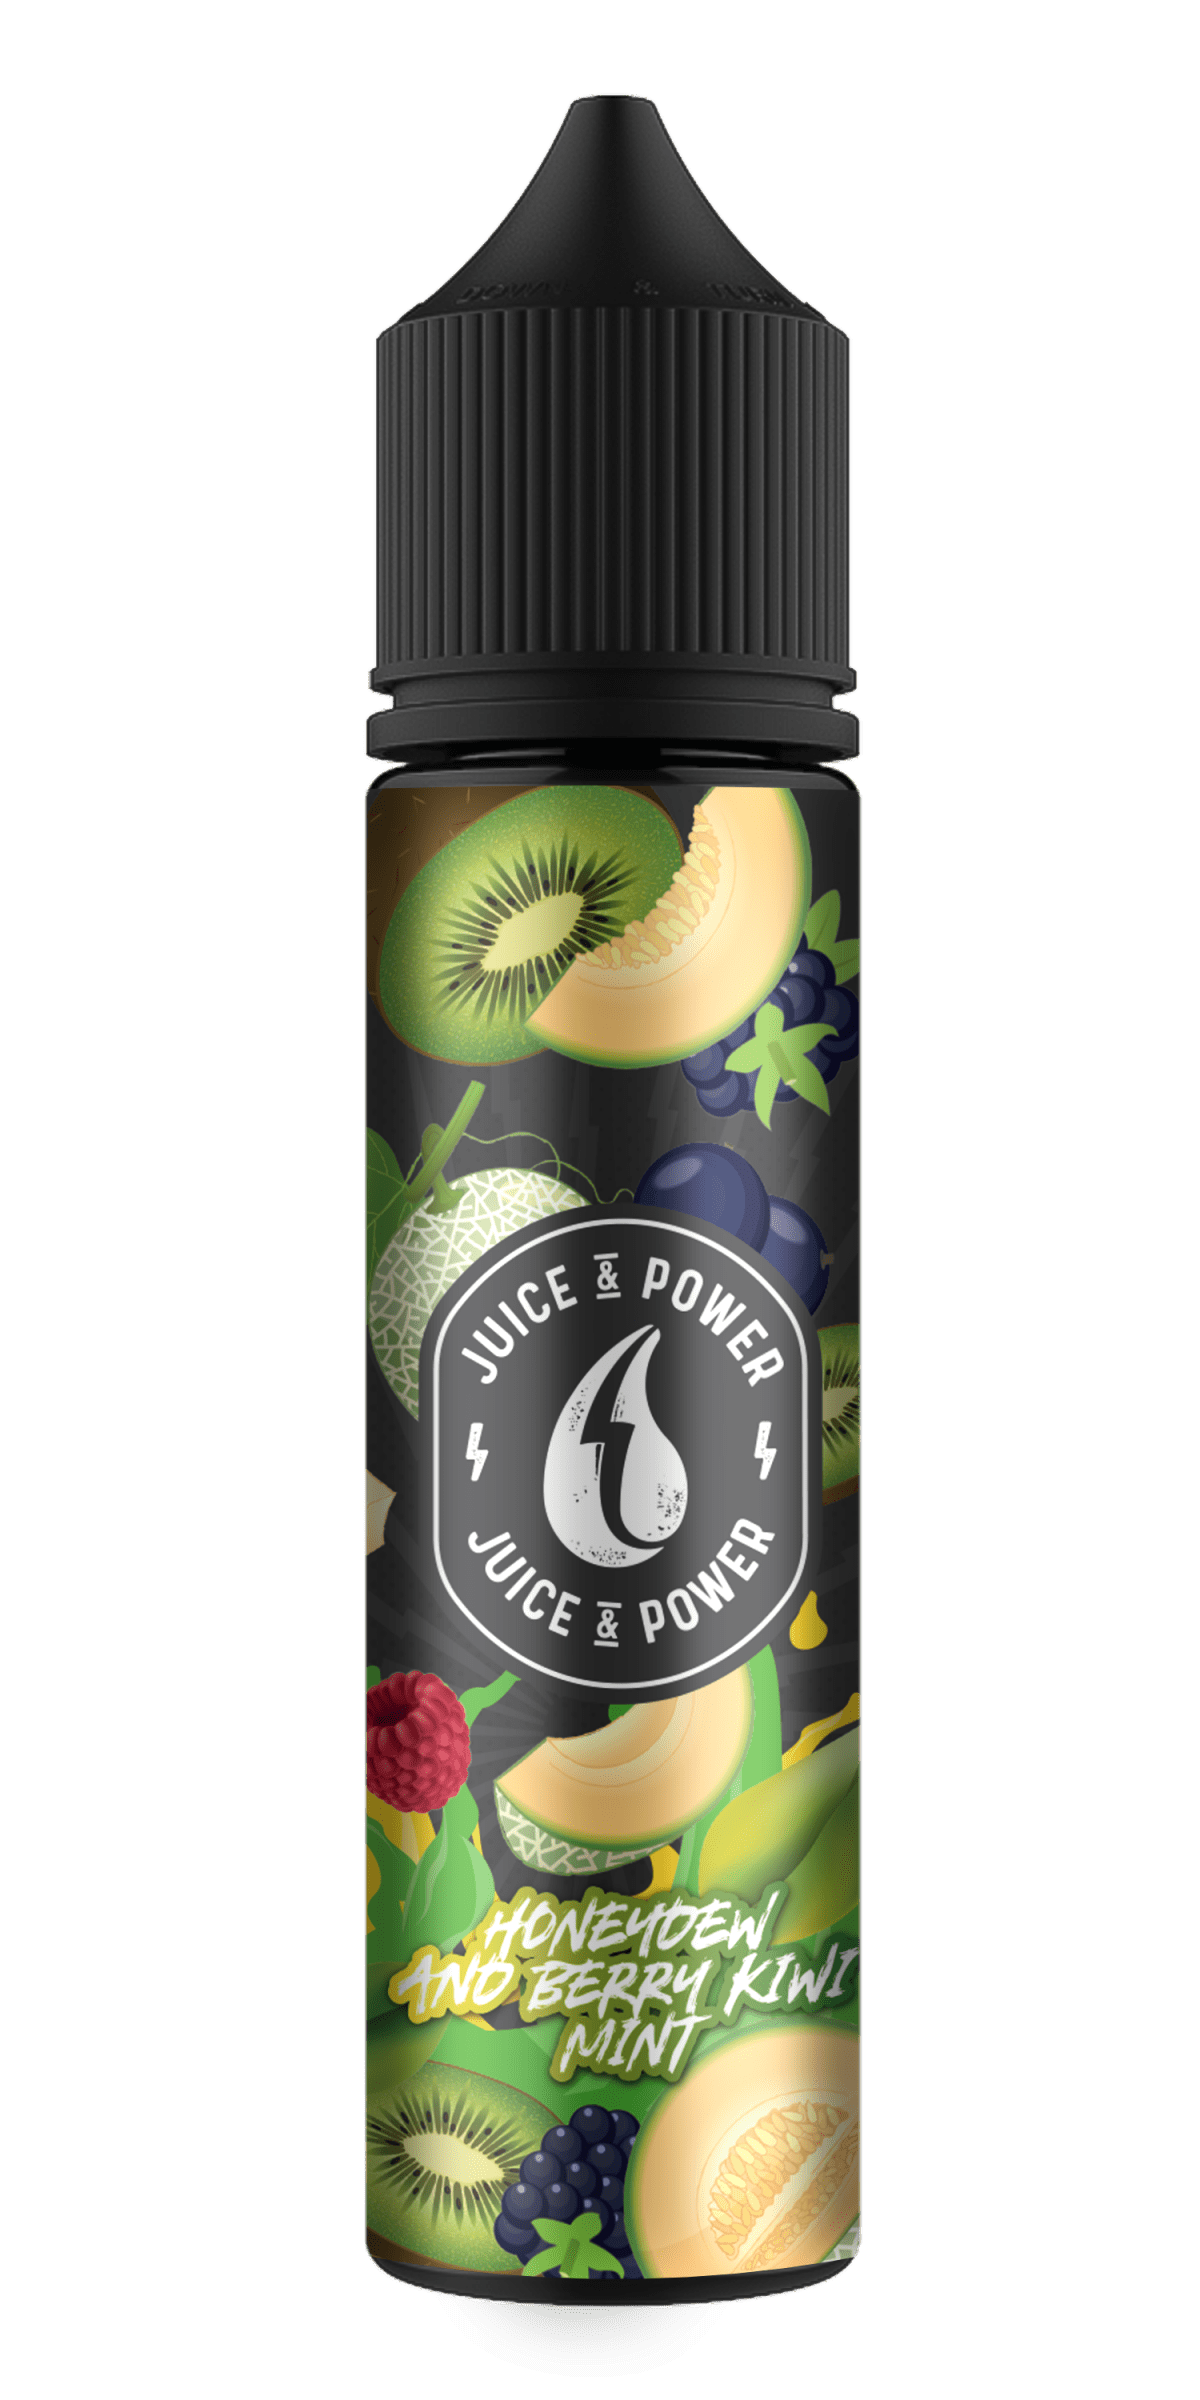 HONEYDEW AND BERRY KIWI MINT E LIQUID BY JUICE 'N' POWER 50ML 70VG - Eliquids Outlet